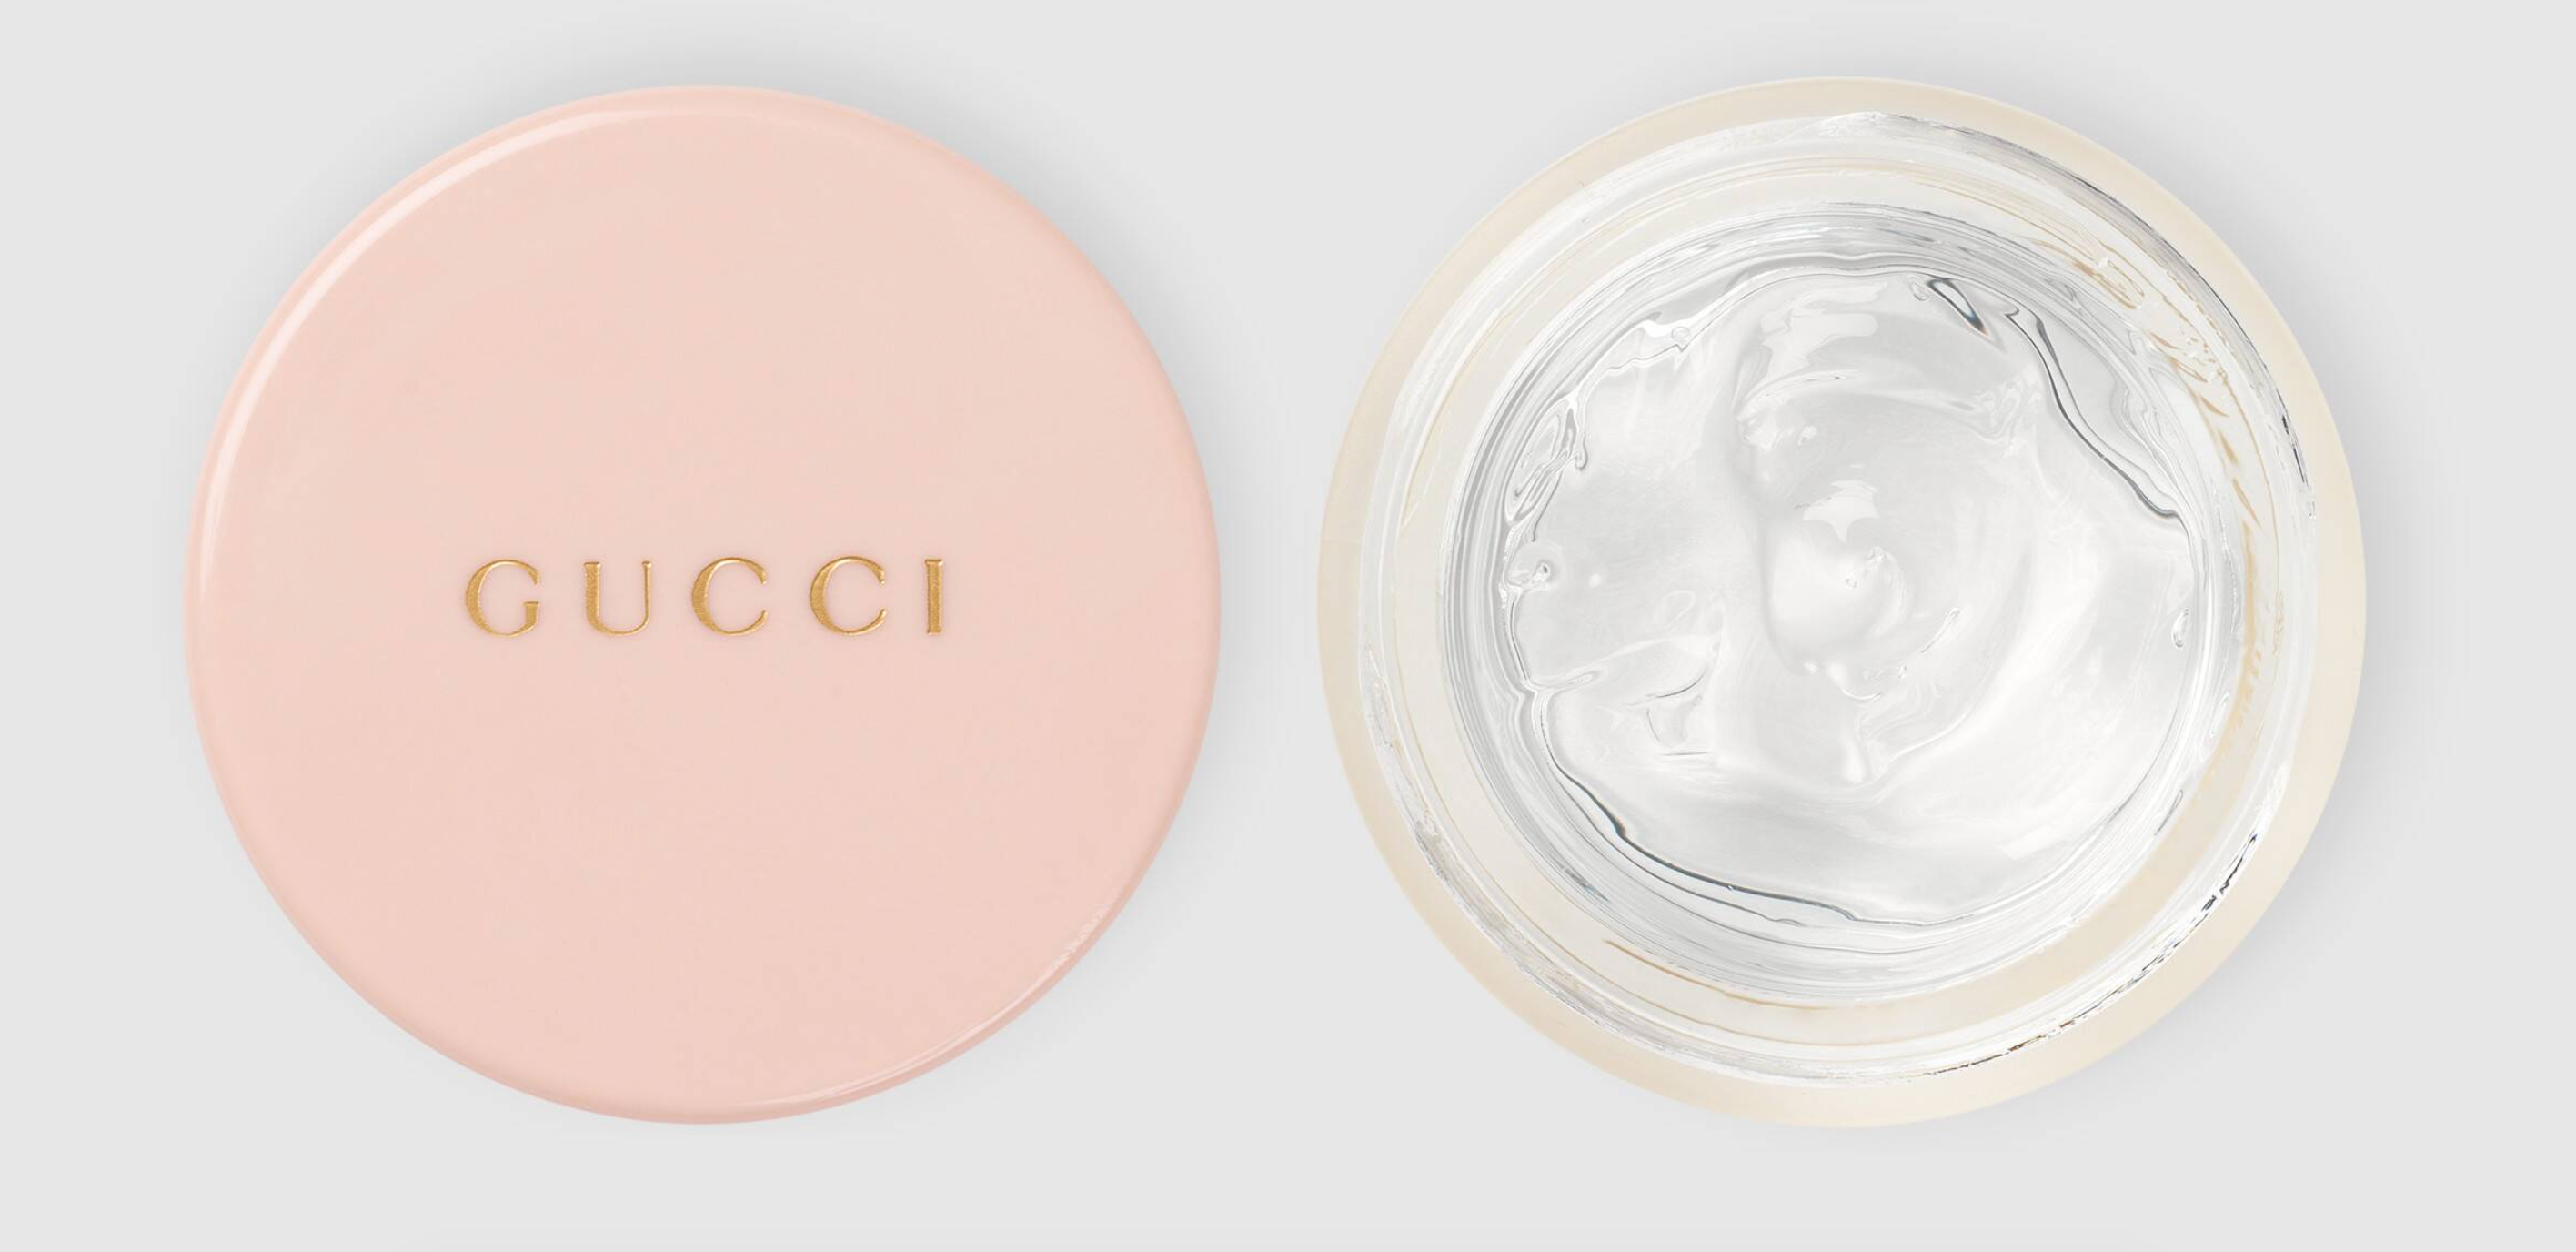 ENDOXIST | Birthday Gift List | Luxury Gifts | Fashion Gifts | Wife's Birthday | Gucci Face Gloss